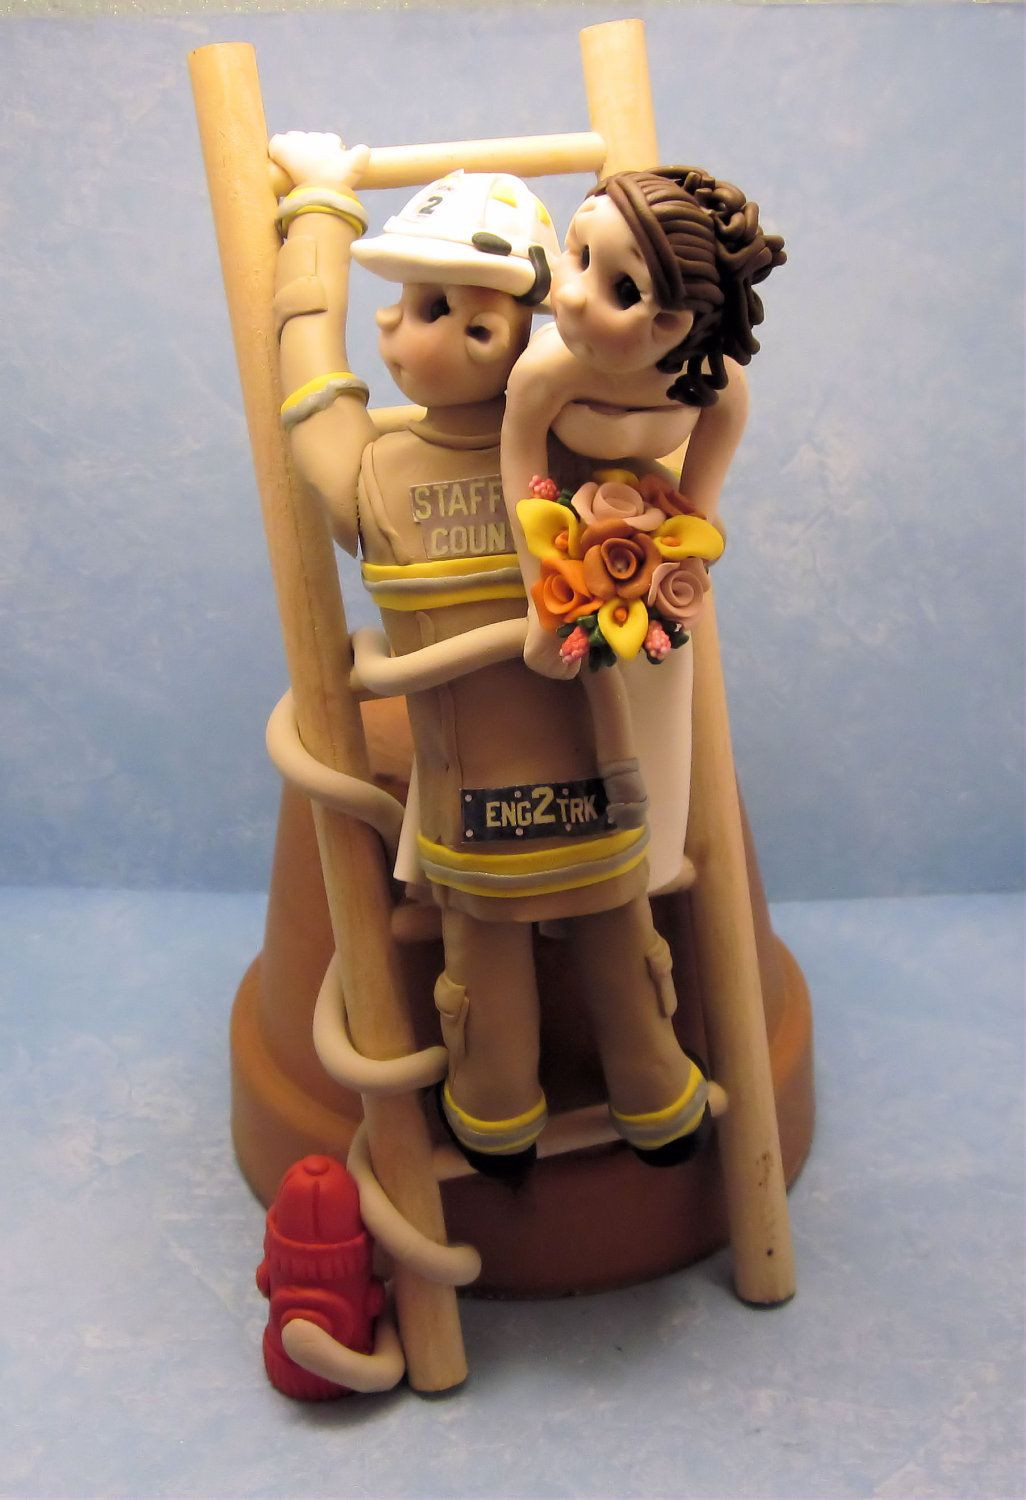 Firefighter Wedding Cake
 fire fighter cakes